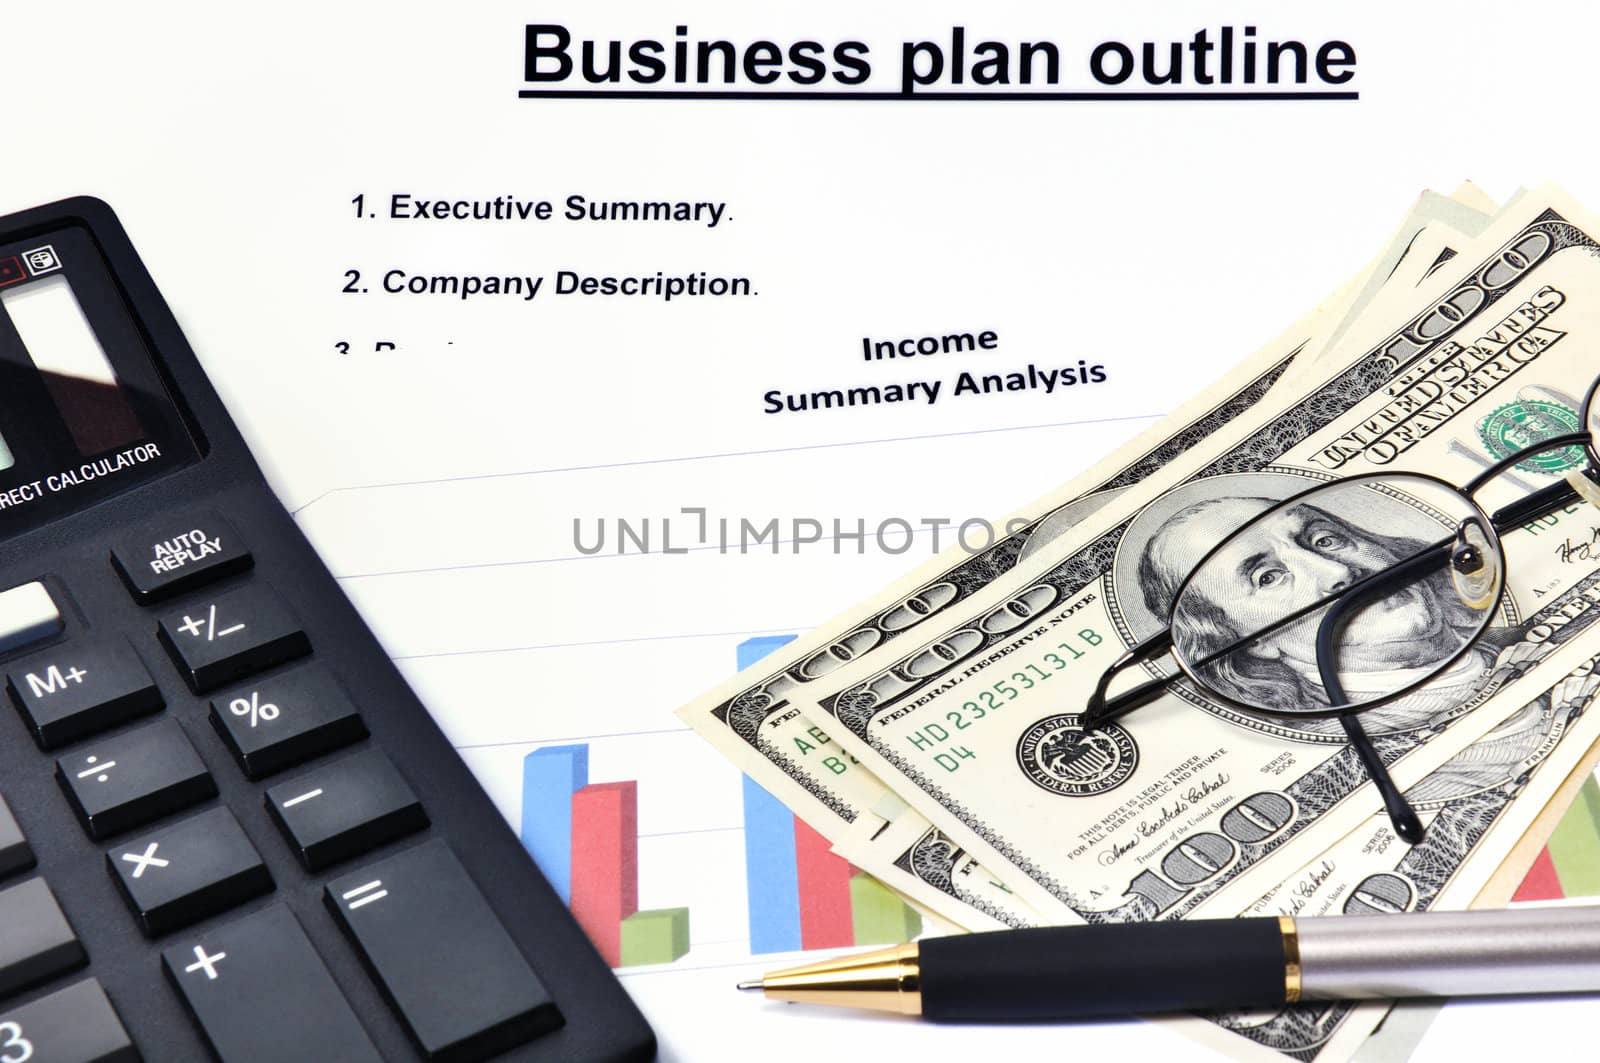 Business plan with graphical analysis, money, calculator and pen.